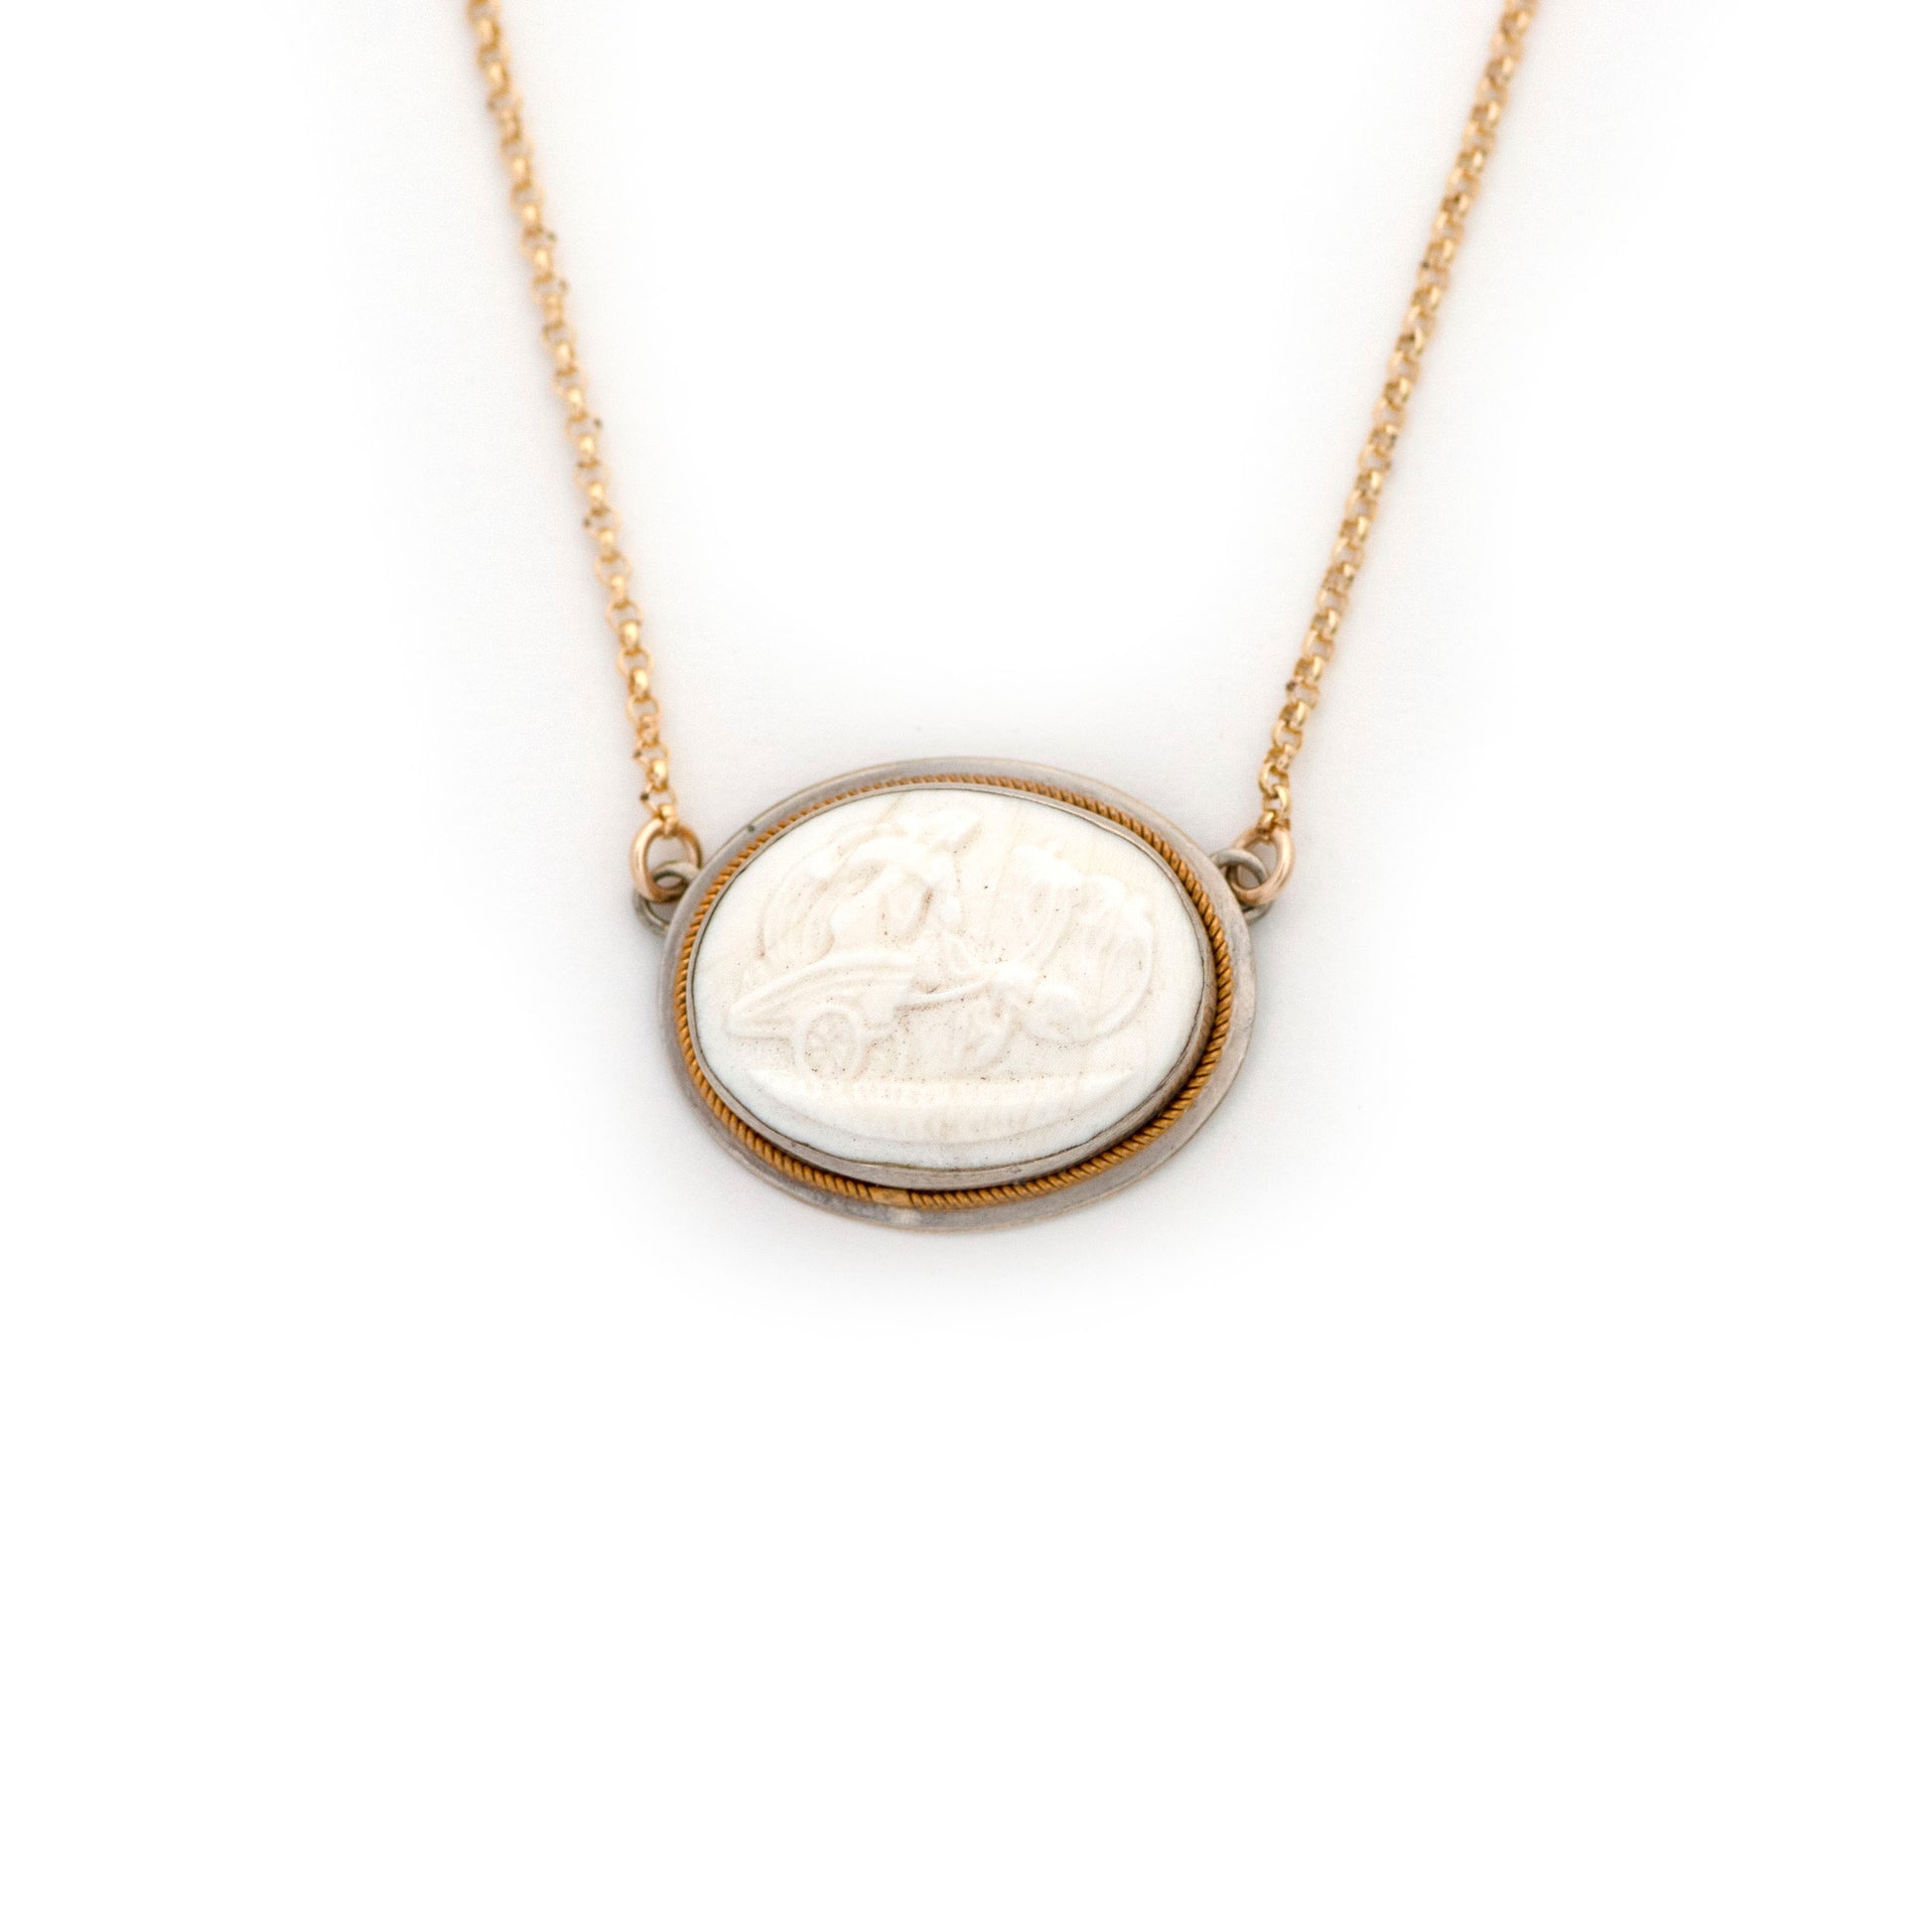 This antique necklace is made up of:  Sterling Silver Victorian pendant from the late 1800s with a twisted gold border and cream white porcelain cameo. Cameo depicts the Greek goddess of love, Aphrodite, riding a chariot drawn by a pair of doves. Doves are a prominent symbol of hers, as are the planet Venus and the Spring month of April. Friday is the day of Venus. 